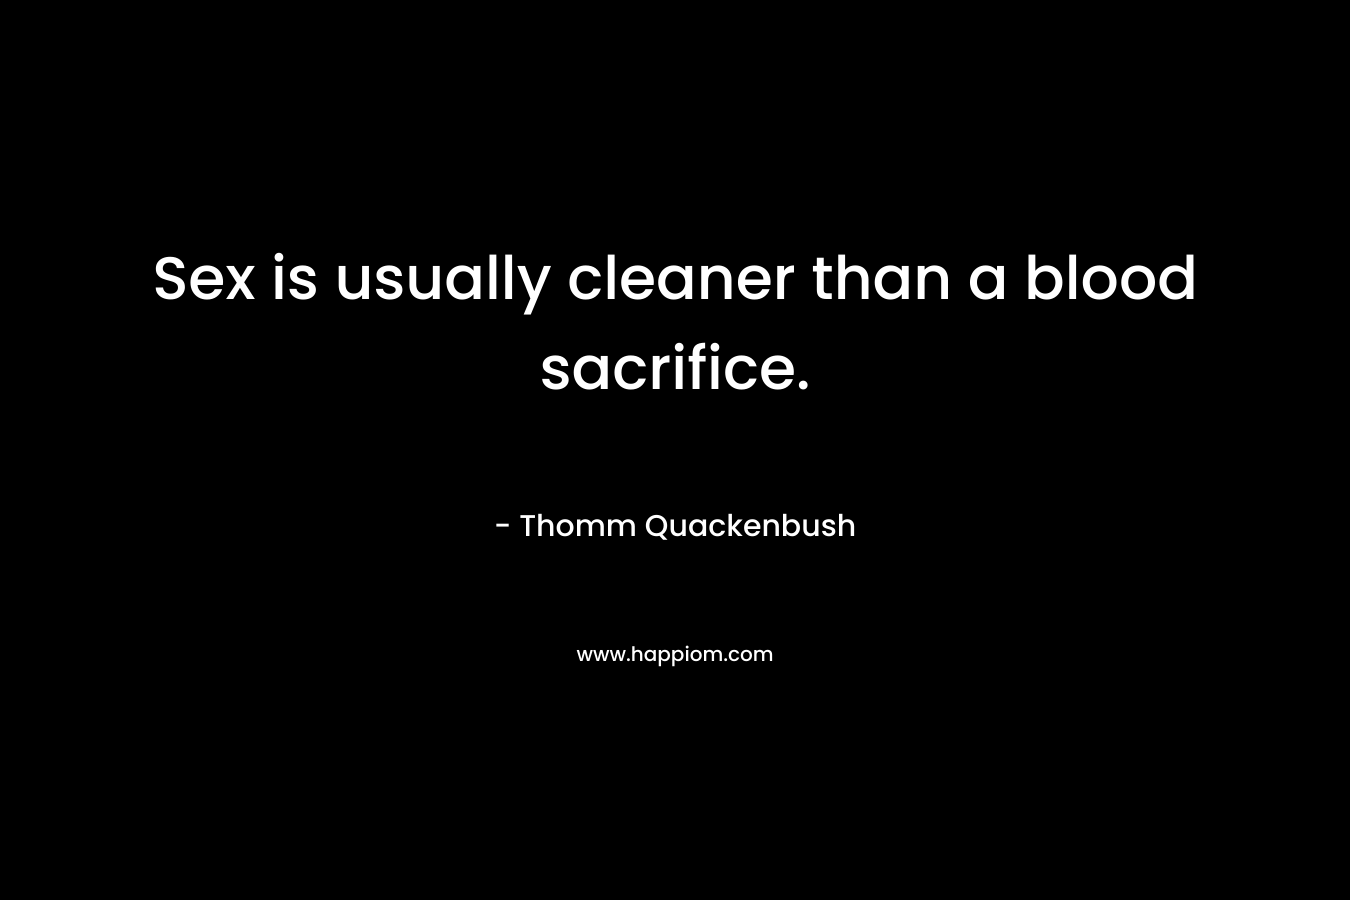 Sex is usually cleaner than a blood sacrifice. – Thomm Quackenbush